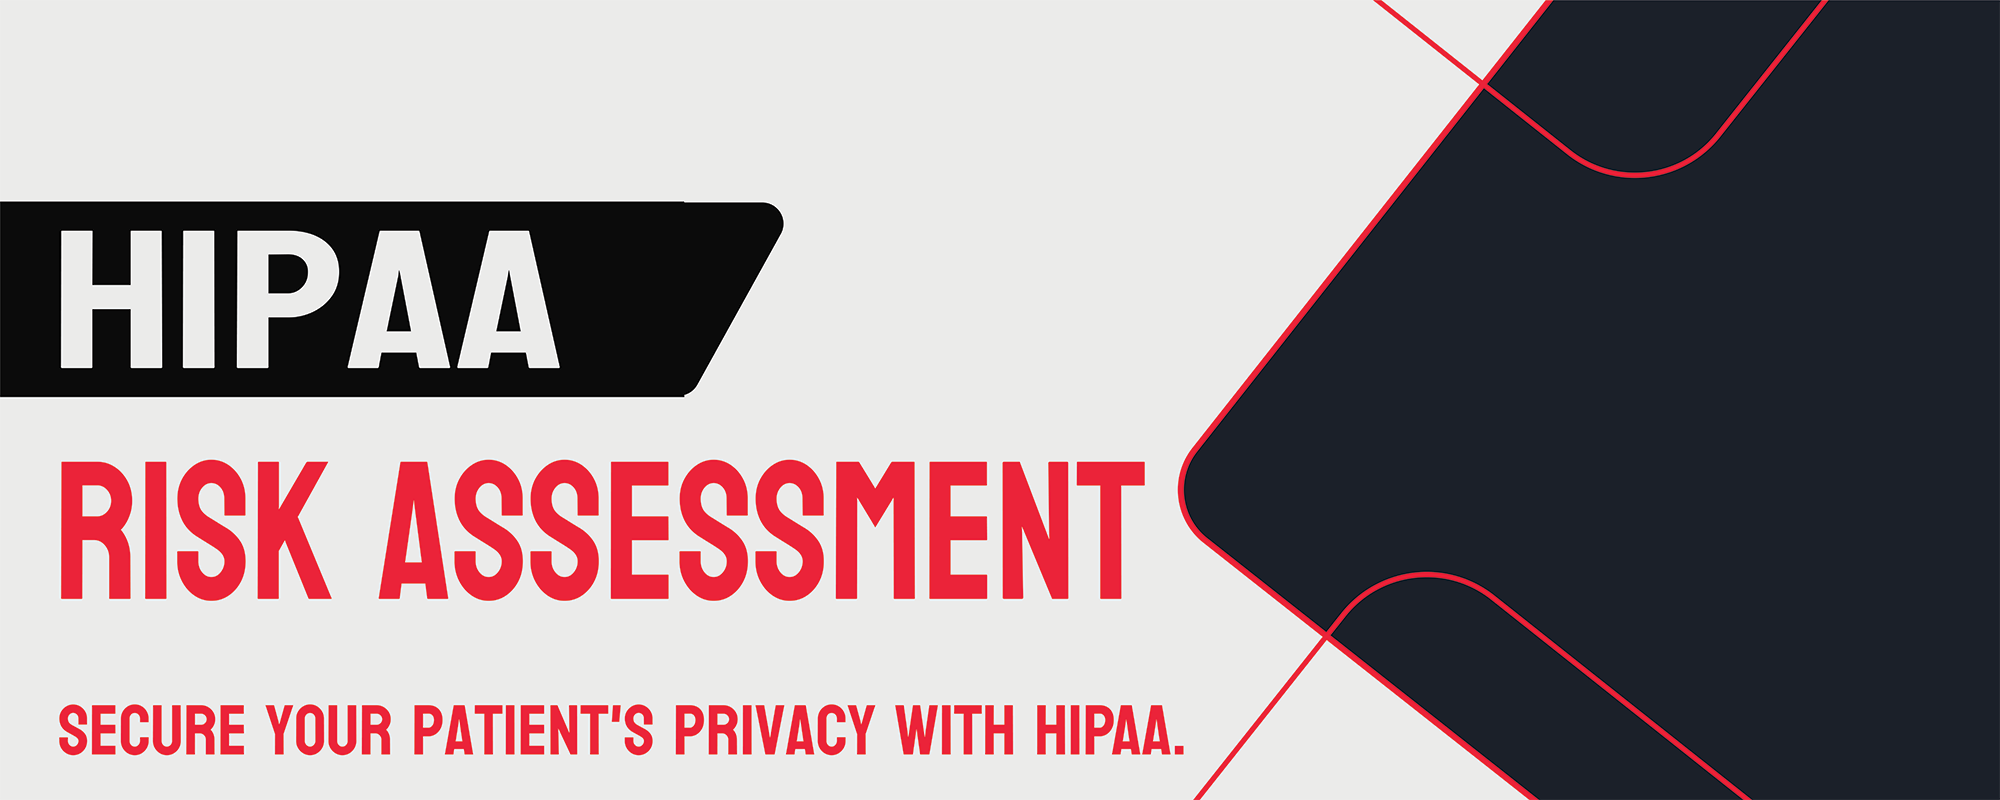 Conducting-a-HIPAA-Risk-Assessment-A-Step-by-Step-Guide